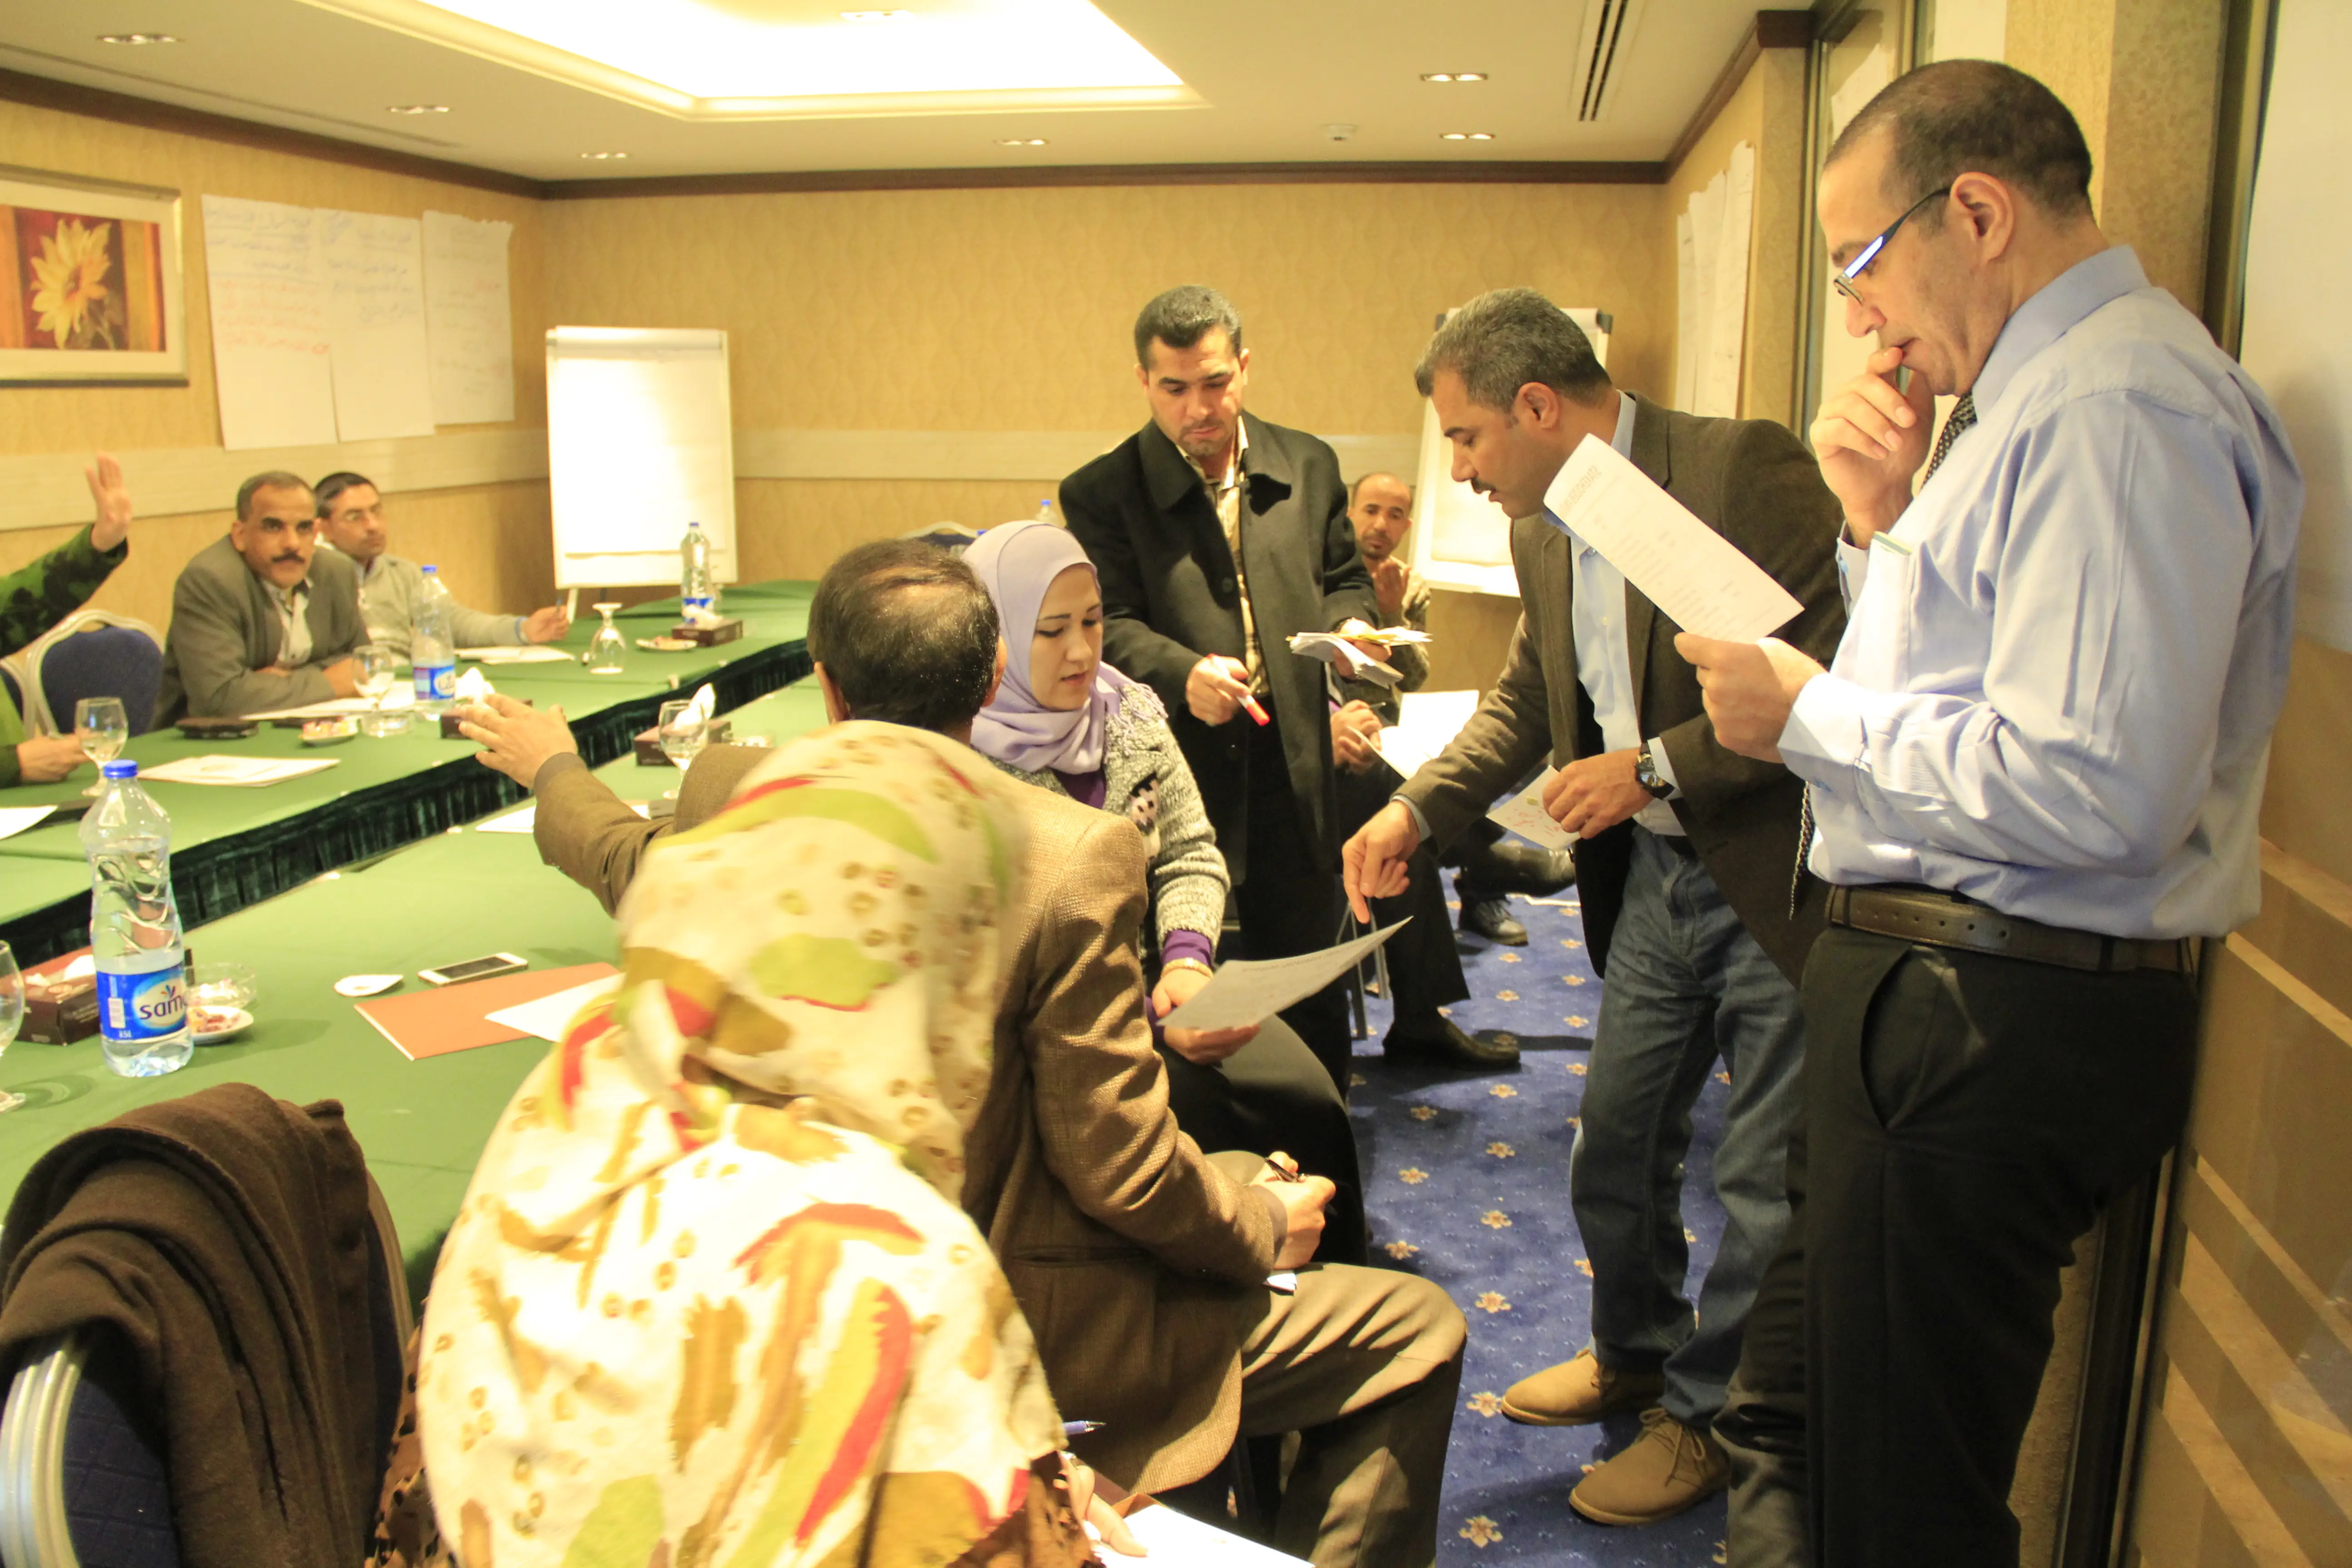 Training on Stakeholder Engagement - Working Groups